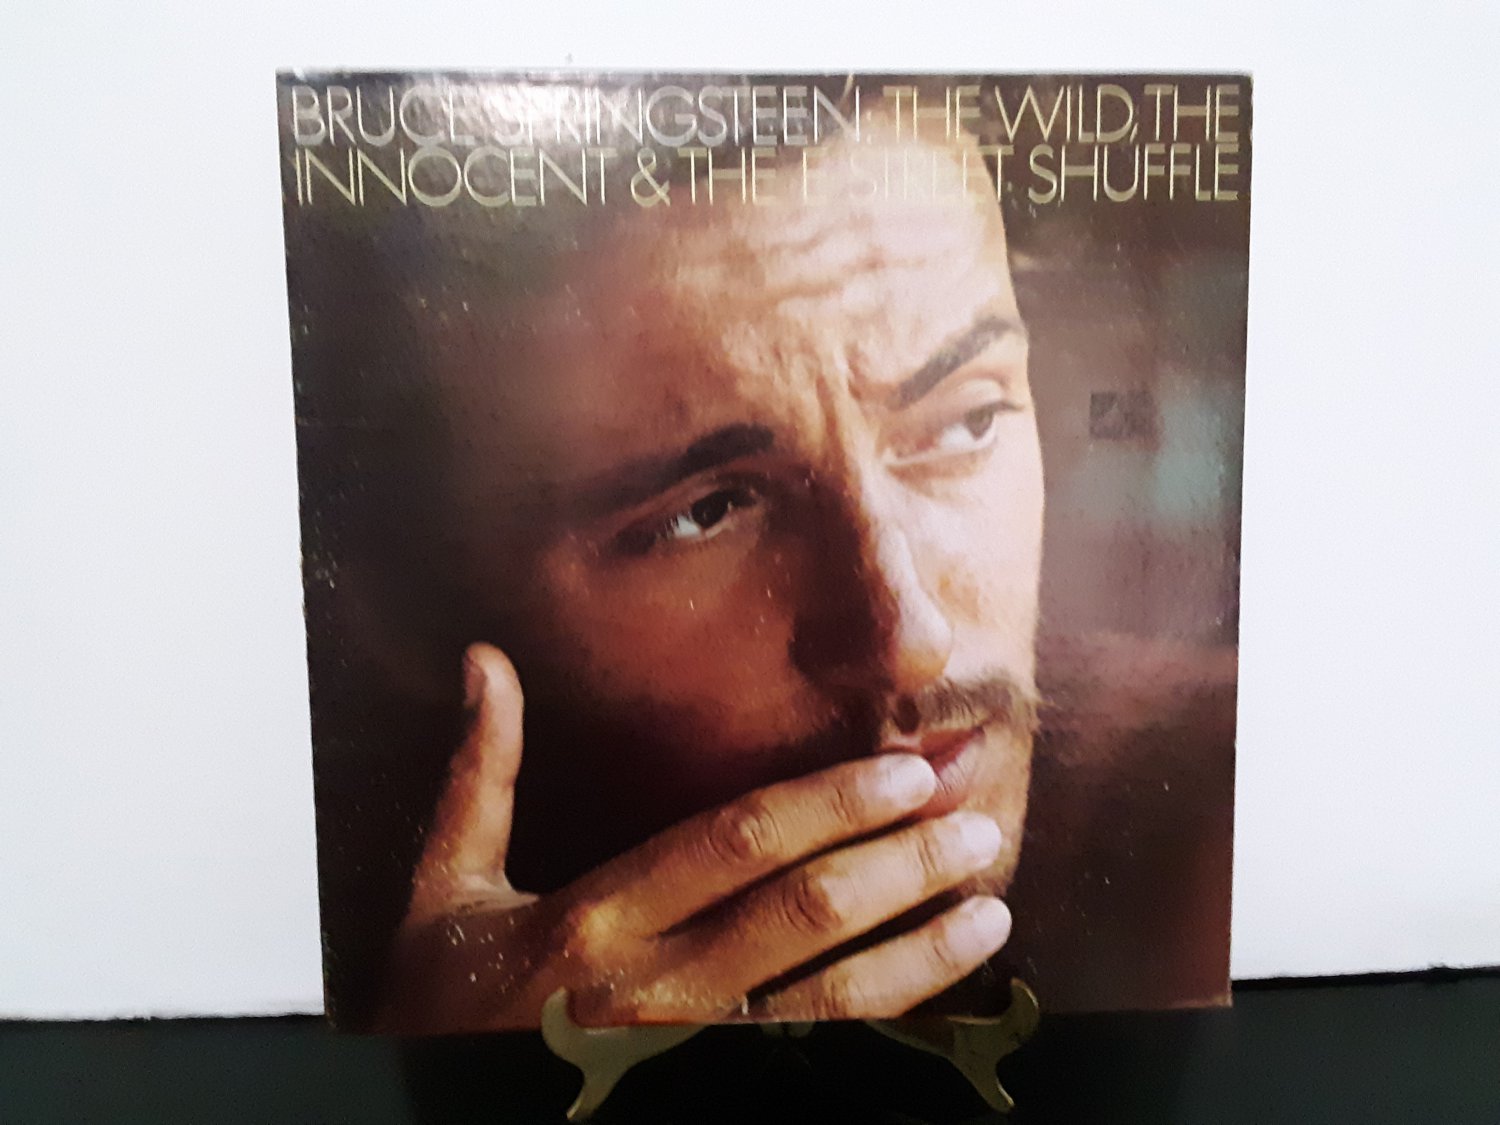 the wild the innocent and the e street shuffle review